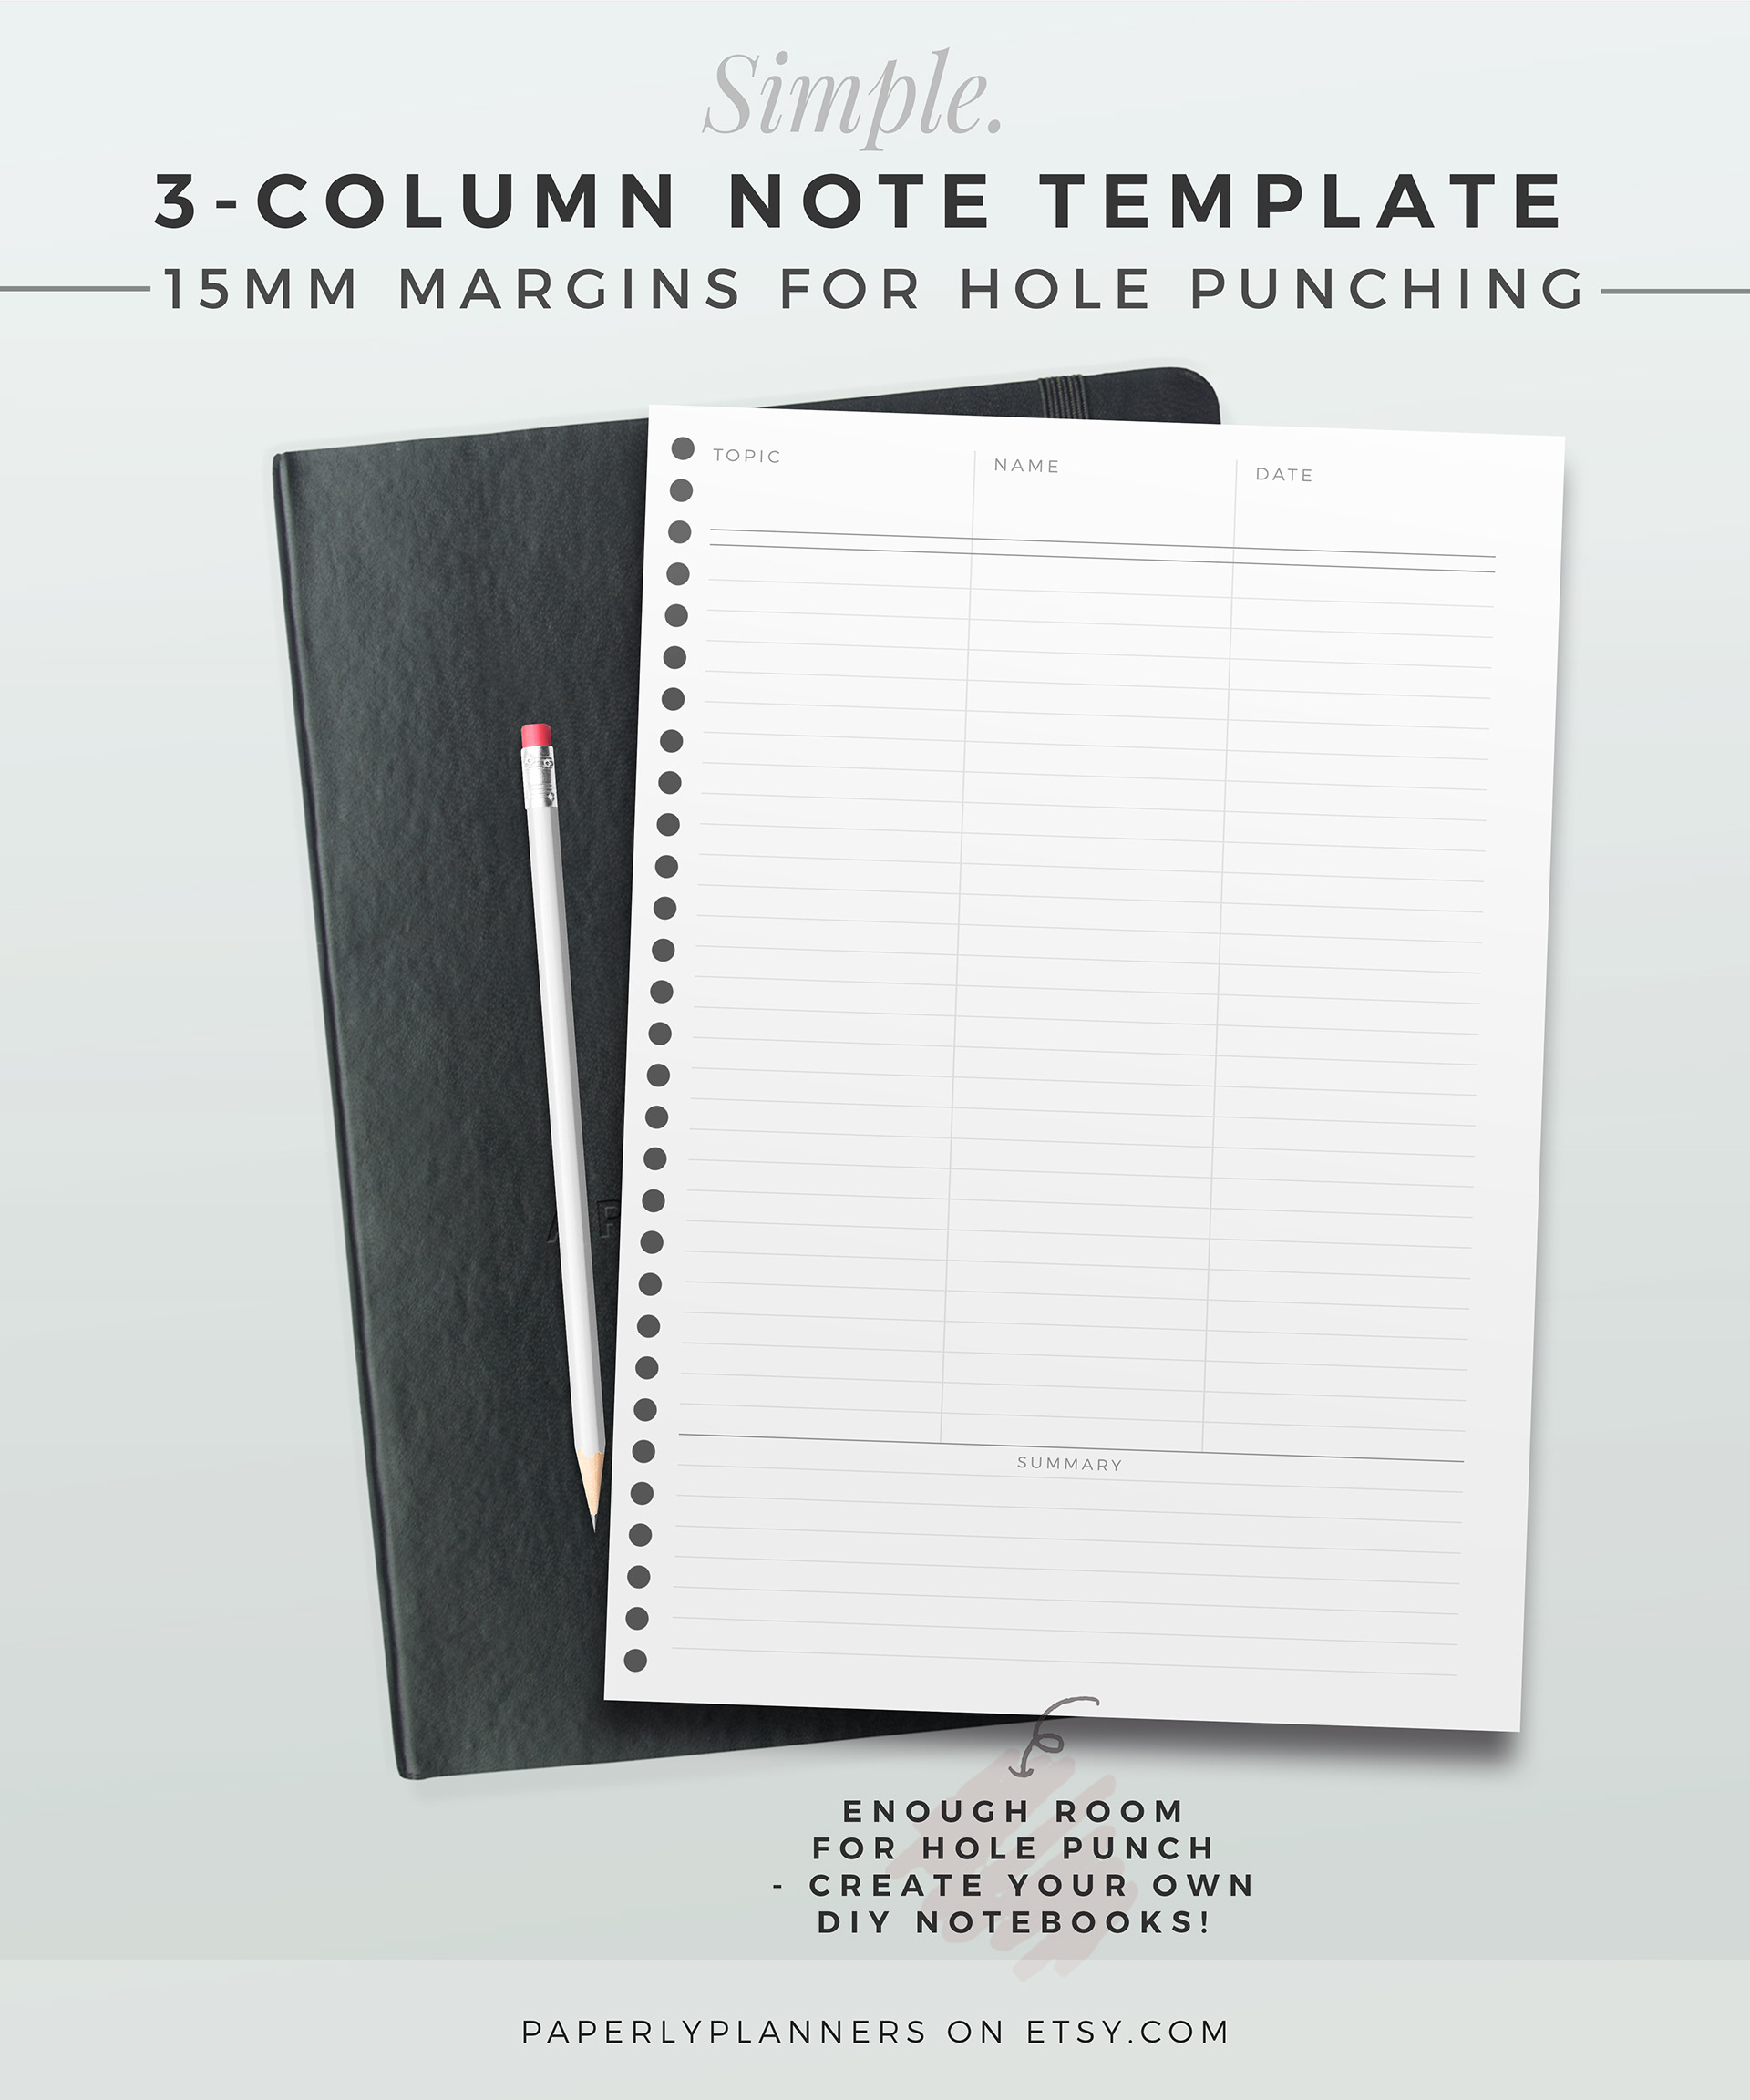 Paperly Planners Beautiful, Productive. SIMPLE 3Column Note Template